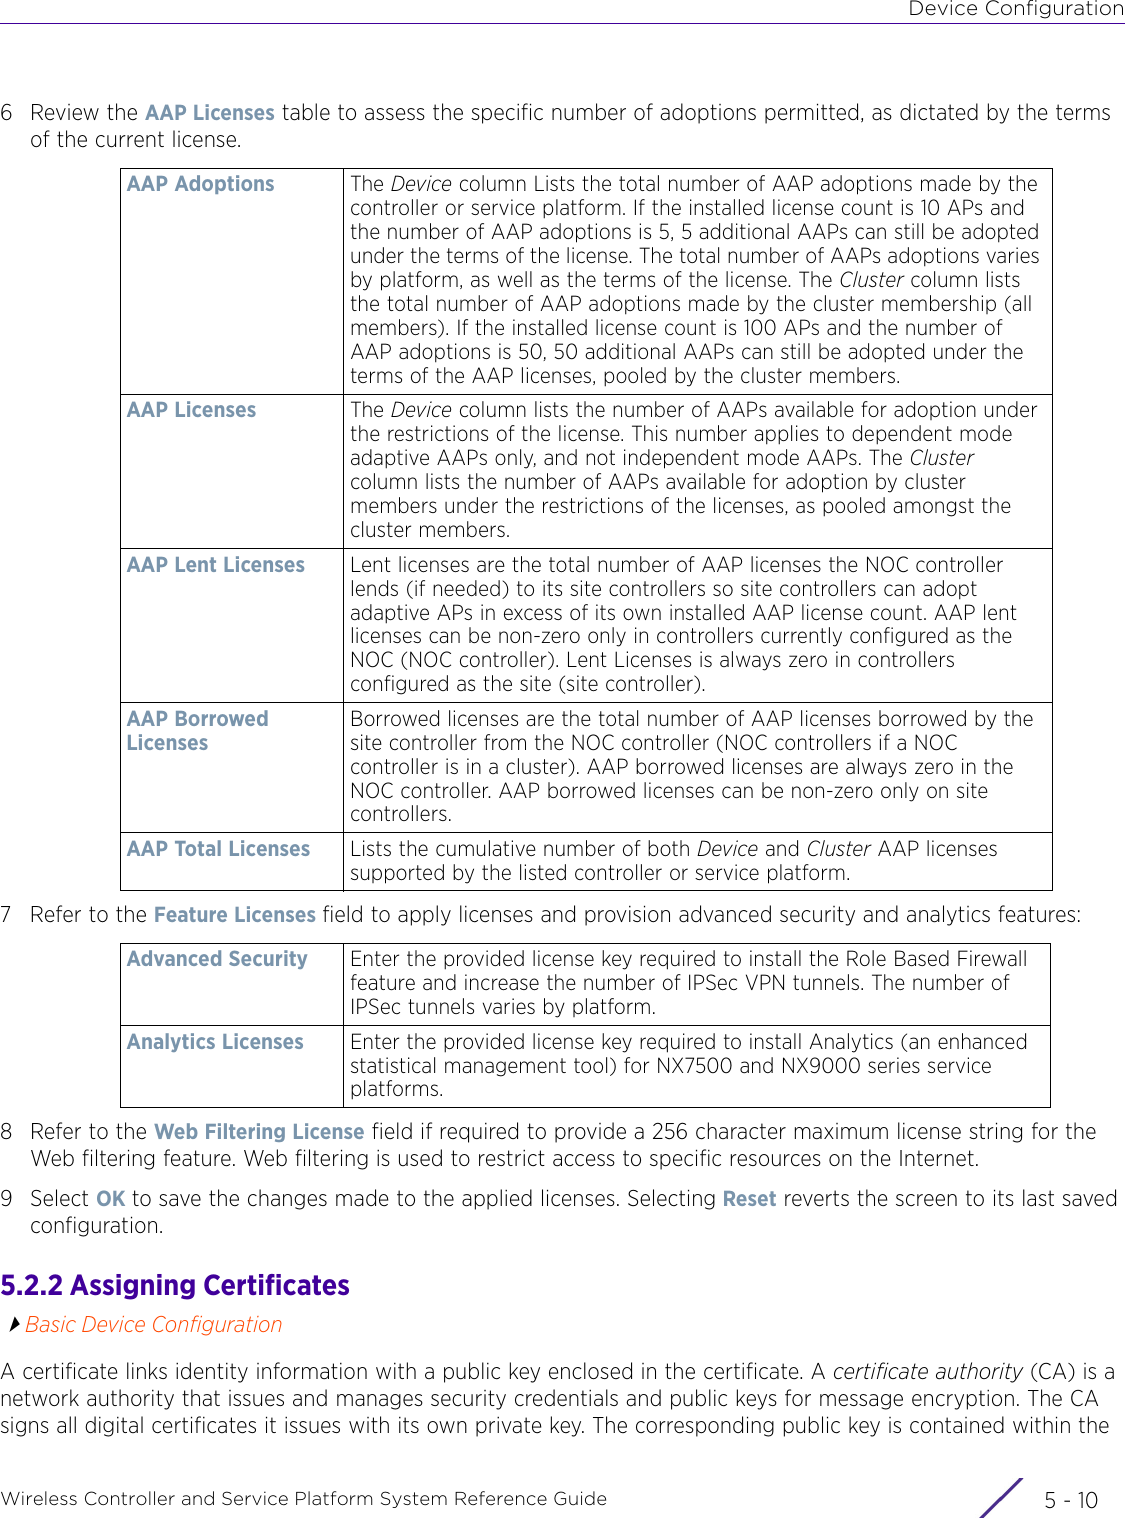 Device ConfigurationWireless Controller and Service Platform System Reference Guide  5 - 106Review the AAP Licenses table to assess the specific number of adoptions permitted, as dictated by the terms of the current license.7 Refer to the Feature Licenses field to apply licenses and provision advanced security and analytics features:8 Refer to the Web Filtering License field if required to provide a 256 character maximum license string for the Web filtering feature. Web filtering is used to restrict access to specific resources on the Internet.9Select OK to save the changes made to the applied licenses. Selecting Reset reverts the screen to its last saved configuration.5.2.2 Assigning CertificatesBasic Device ConfigurationA certificate links identity information with a public key enclosed in the certificate. A certificate authority (CA) is a network authority that issues and manages security credentials and public keys for message encryption. The CA signs all digital certificates it issues with its own private key. The corresponding public key is contained within the AAP Adoptions The Device column Lists the total number of AAP adoptions made by the controller or service platform. If the installed license count is 10 APs and the number of AAP adoptions is 5, 5 additional AAPs can still be adopted under the terms of the license. The total number of AAPs adoptions varies by platform, as well as the terms of the license. The Cluster column lists the total number of AAP adoptions made by the cluster membership (all members). If the installed license count is 100 APs and the number of AAP adoptions is 50, 50 additional AAPs can still be adopted under the terms of the AAP licenses, pooled by the cluster members. AAP Licenses The Device column lists the number of AAPs available for adoption under the restrictions of the license. This number applies to dependent mode adaptive AAPs only, and not independent mode AAPs. The Cluster column lists the number of AAPs available for adoption by cluster members under the restrictions of the licenses, as pooled amongst the cluster members. AAP Lent Licenses Lent licenses are the total number of AAP licenses the NOC controller lends (if needed) to its site controllers so site controllers can adopt adaptive APs in excess of its own installed AAP license count. AAP lent licenses can be non-zero only in controllers currently configured as the NOC (NOC controller). Lent Licenses is always zero in controllers configured as the site (site controller). AAP Borrowed LicensesBorrowed licenses are the total number of AAP licenses borrowed by the site controller from the NOC controller (NOC controllers if a NOC controller is in a cluster). AAP borrowed licenses are always zero in the NOC controller. AAP borrowed licenses can be non-zero only on site controllers.AAP Total Licenses Lists the cumulative number of both Device and Cluster AAP licenses supported by the listed controller or service platform.Advanced Security Enter the provided license key required to install the Role Based Firewall feature and increase the number of IPSec VPN tunnels. The number of IPSec tunnels varies by platform. Analytics Licenses Enter the provided license key required to install Analytics (an enhanced statistical management tool) for NX7500 and NX9000 series service platforms.